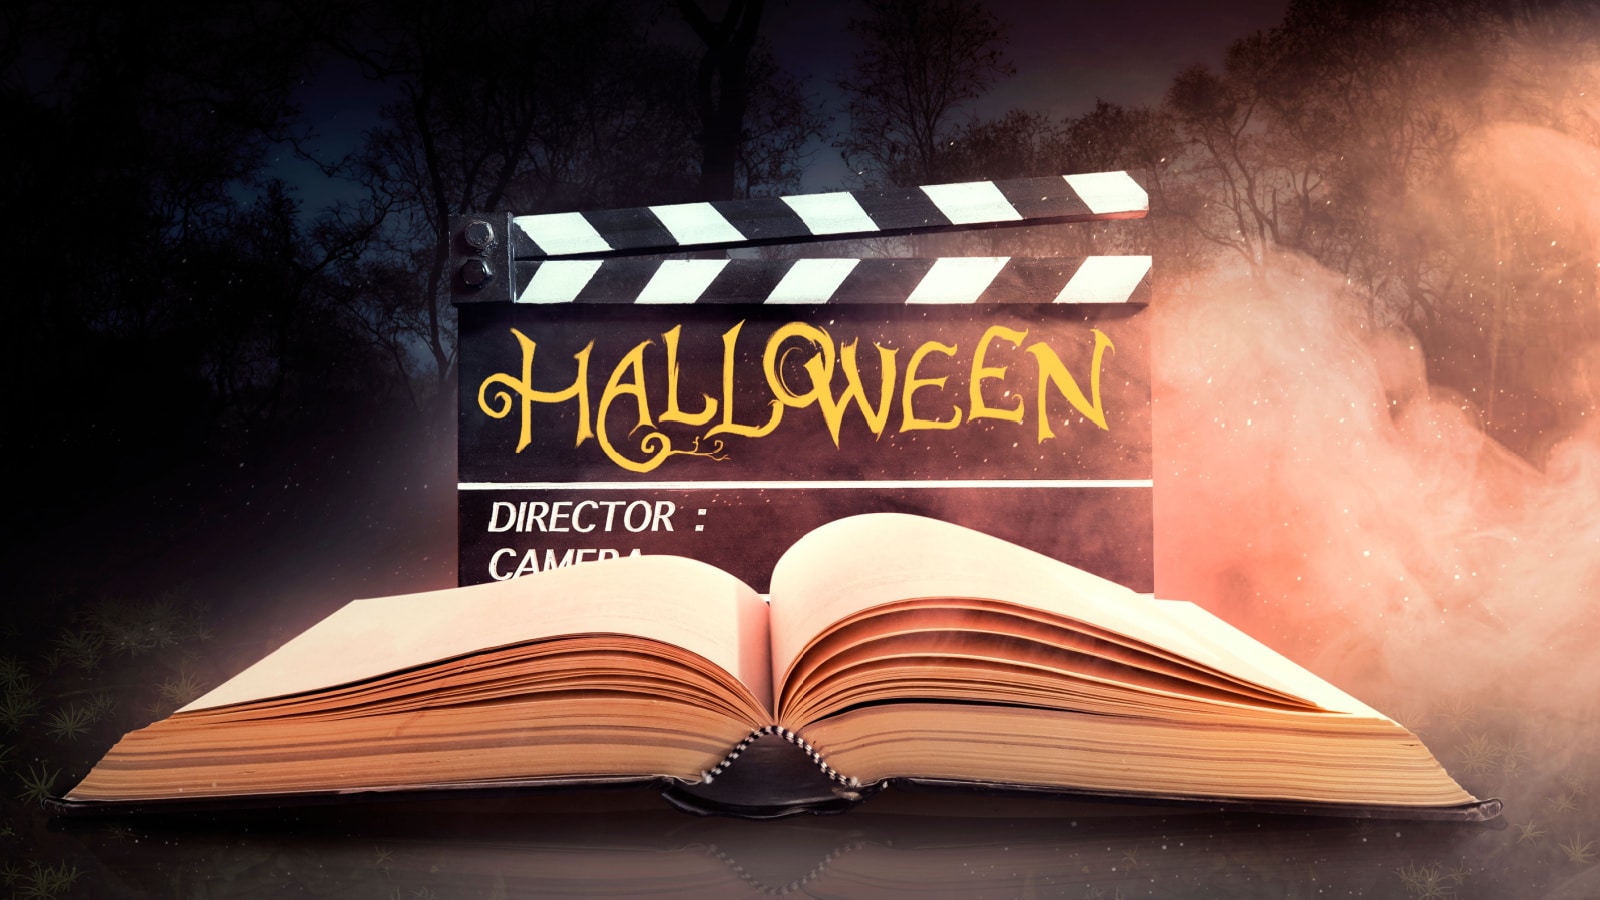 Halloween. Text title on film slate or movie clapperboard and old book in nightmare forest.